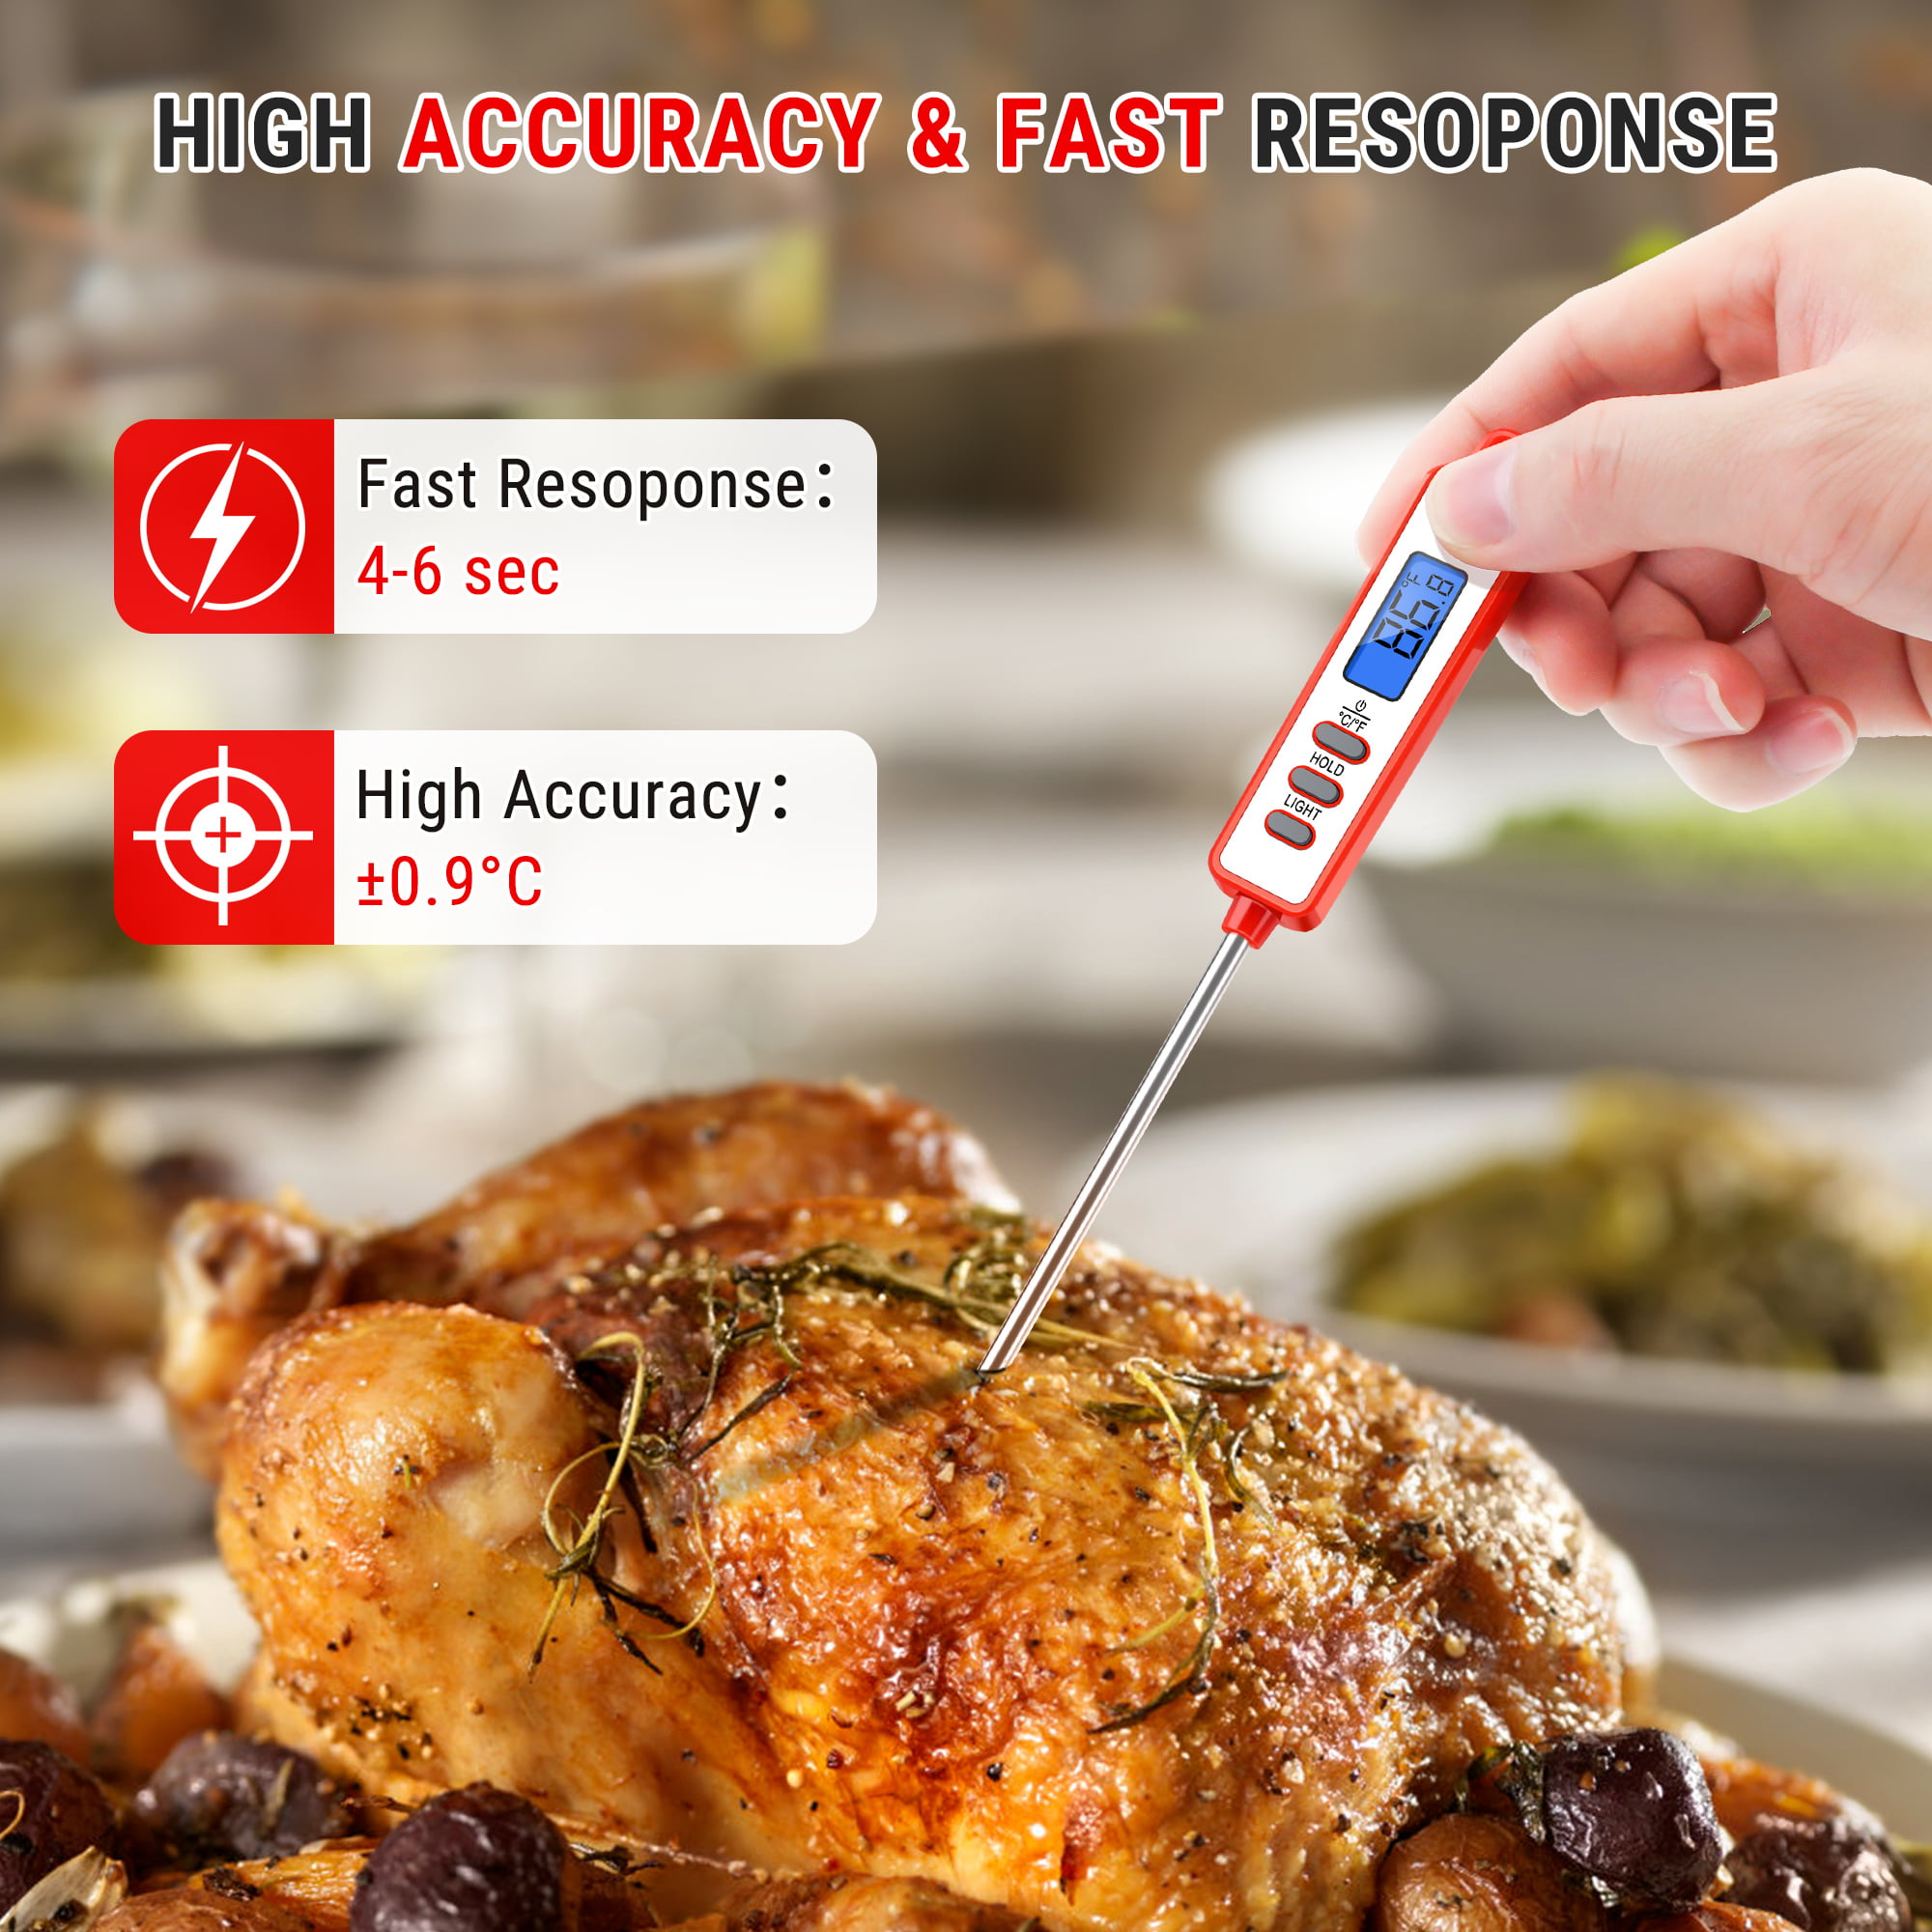 ThermoPro Tp01a Instant Read Digital Meat Thermometer with 5.35 inch Long Probe Thermometer for Grilling BBQ Smoker Grill Oven Thermometer